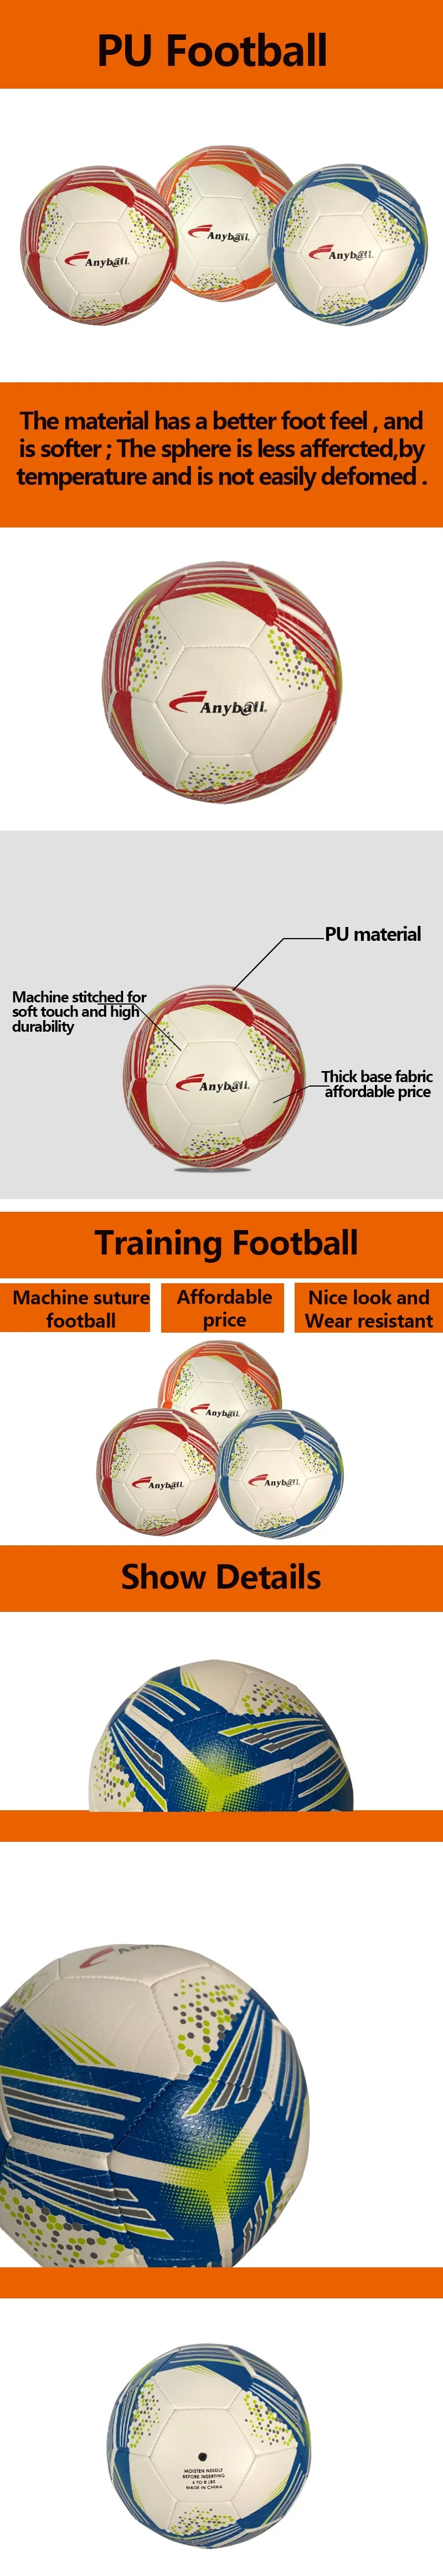 Pretty Design Soccer Ball Soft PU Material Soccer Football for Training Size 5